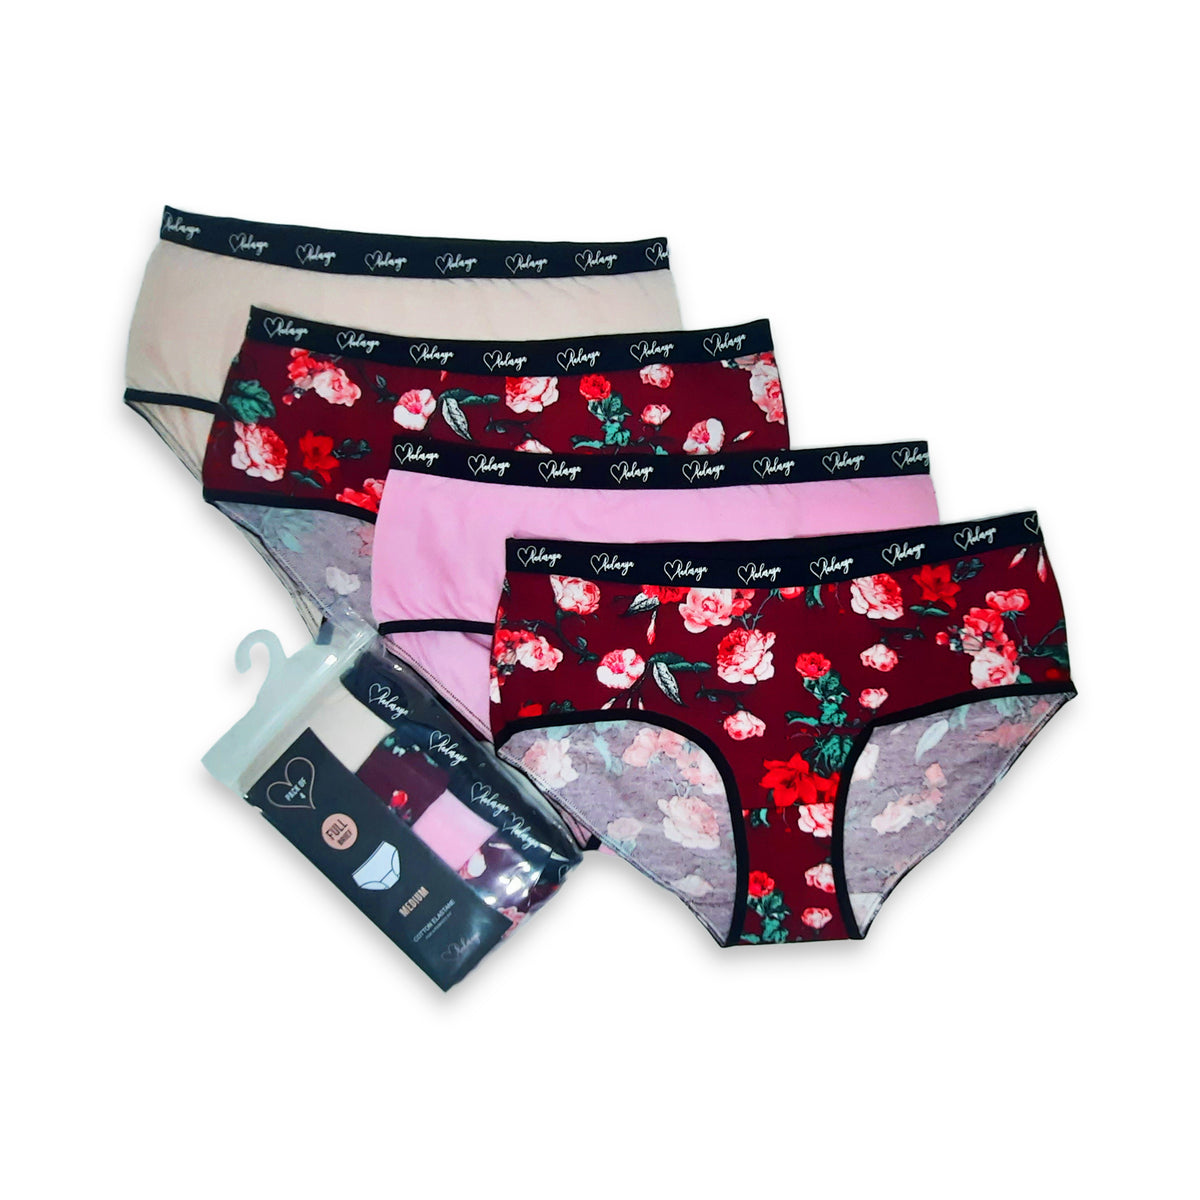 Dina - Brief 4 Pack in Maroon Floral & Pink Combo